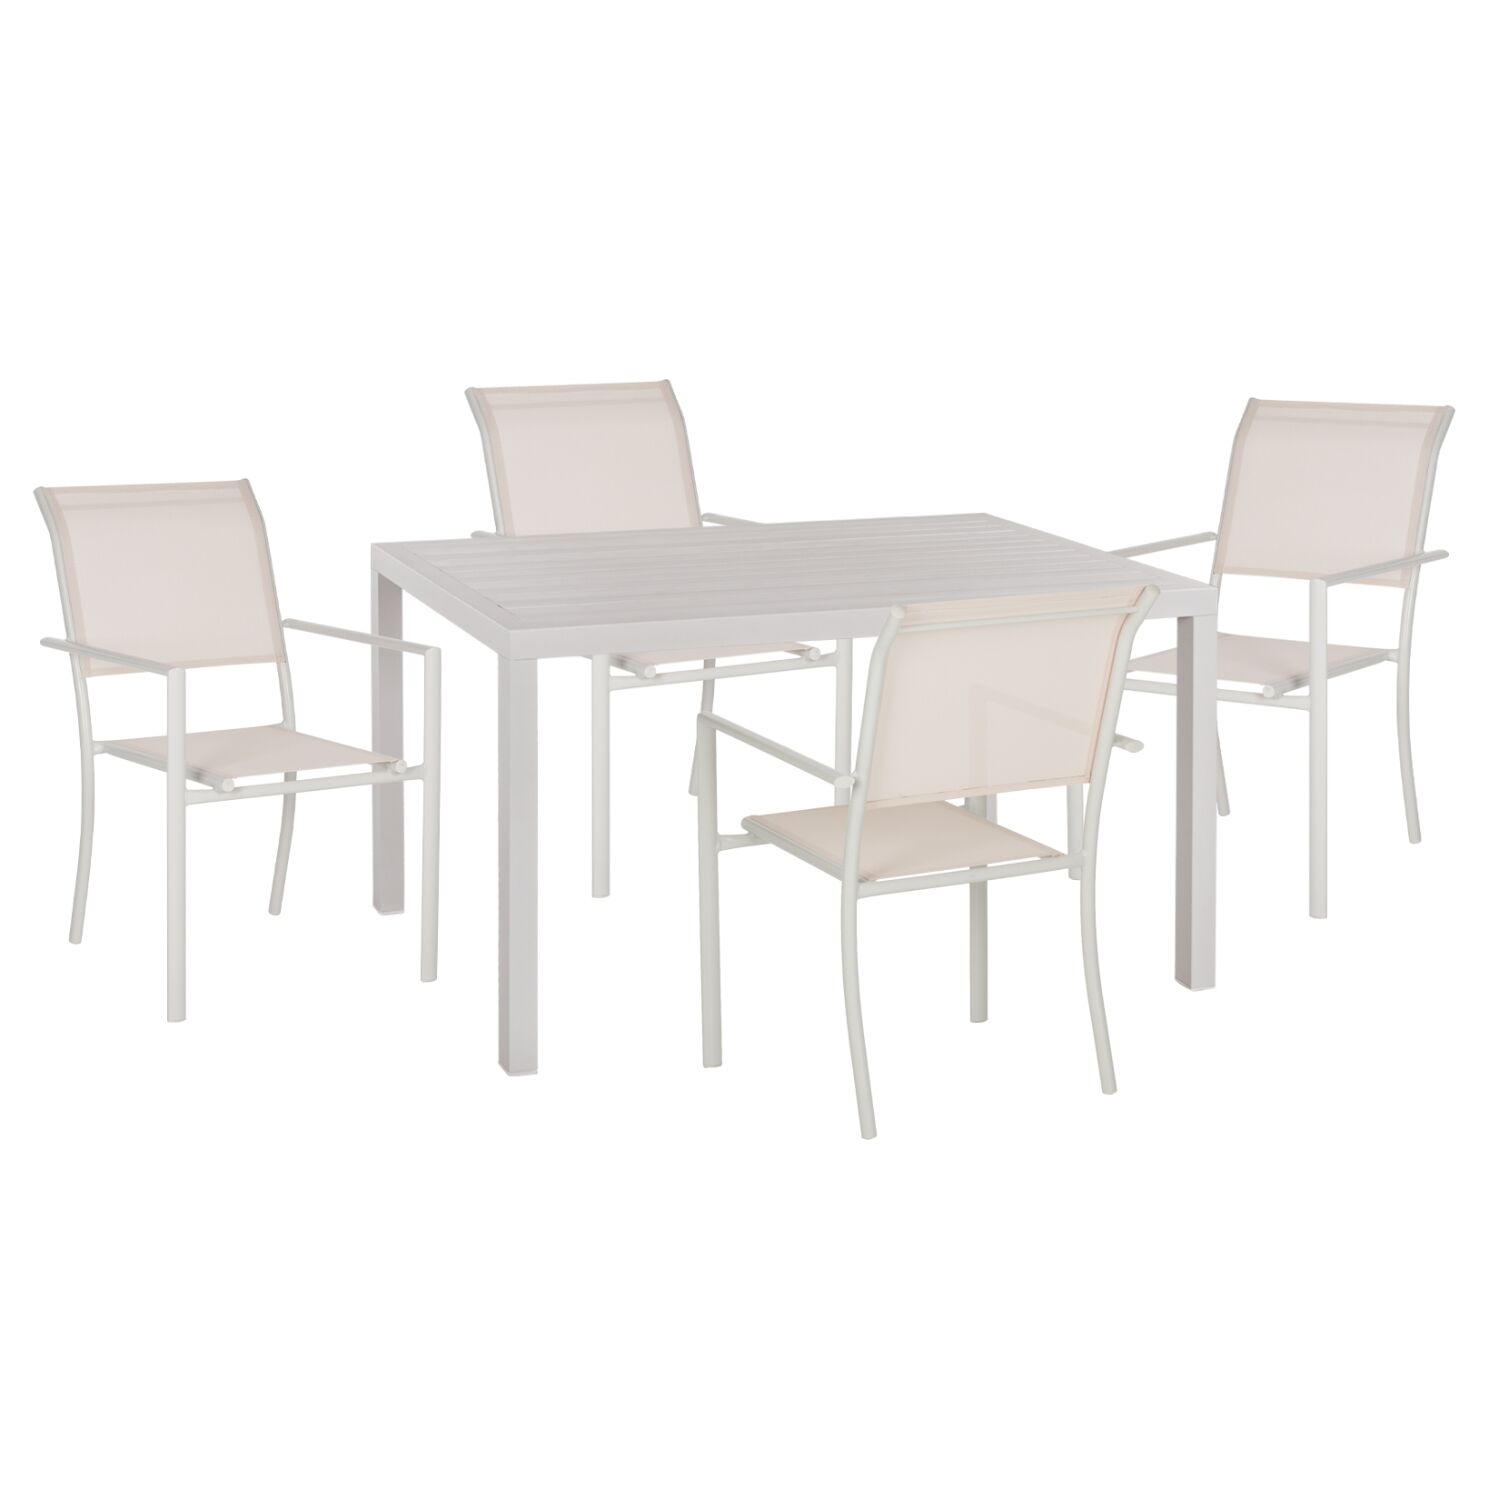 OUTDOOR DINING SET HM11827 5PCS ALUMINUM TABLE AND ARMCHAIRS IN WHITE WITH WHITE TEXTLINE